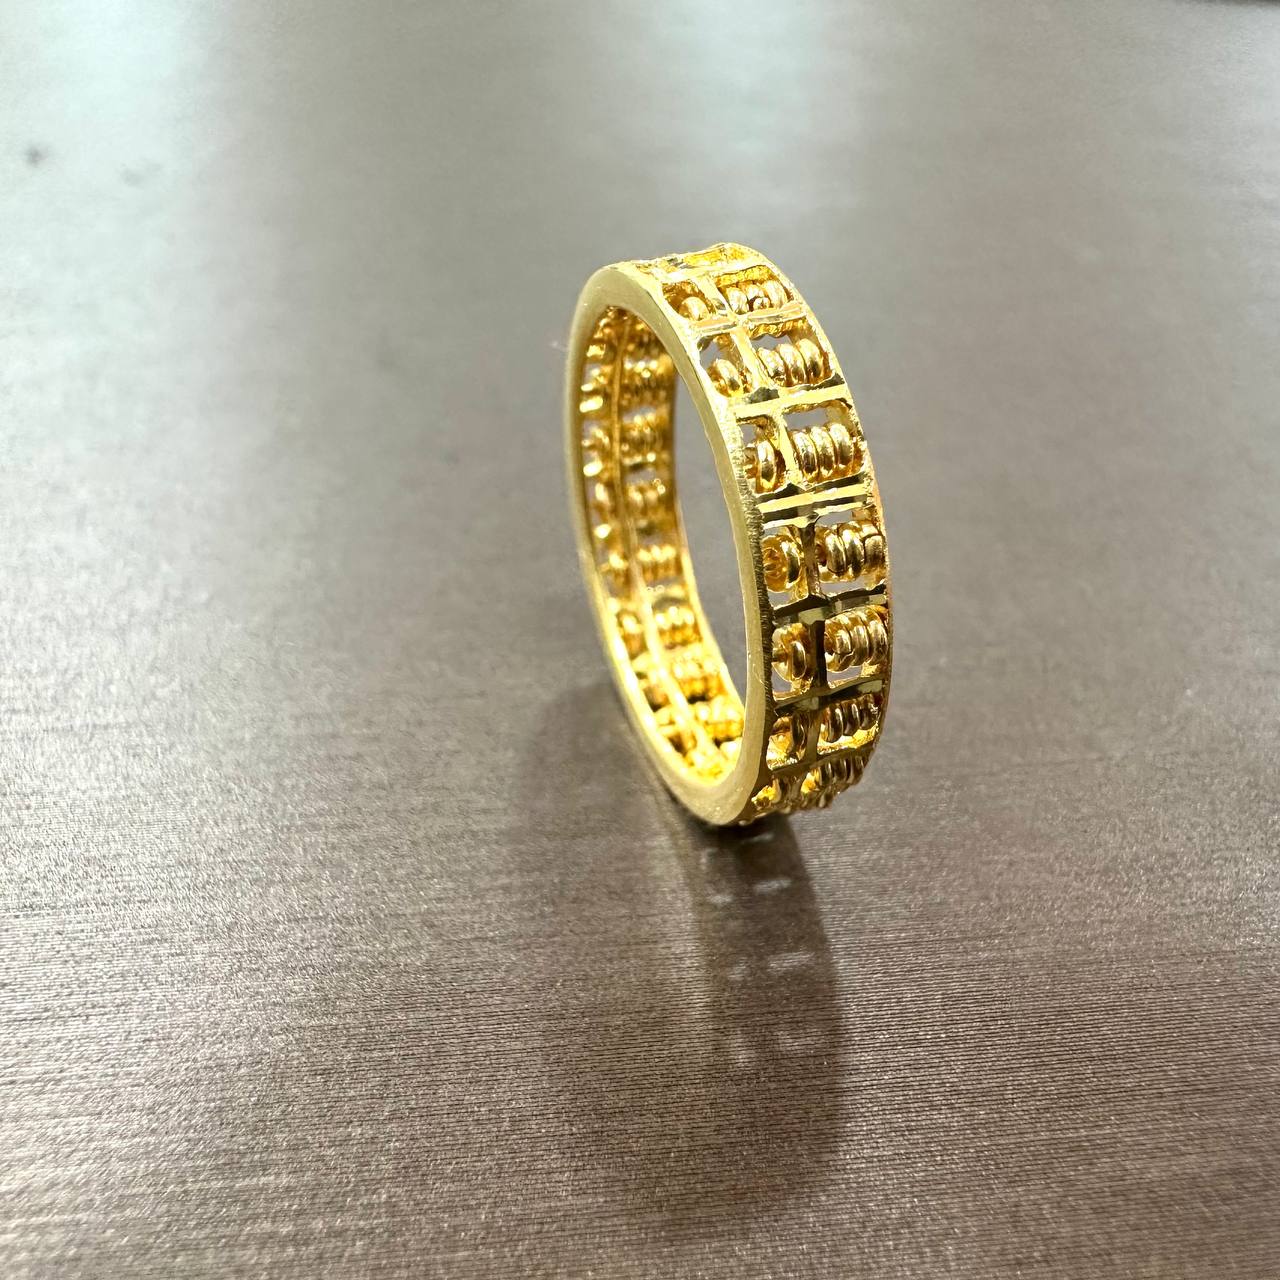 22k / 916 Gold Abacus Ring (Side Smooth Finish) V3-Rings-Best Gold Shop